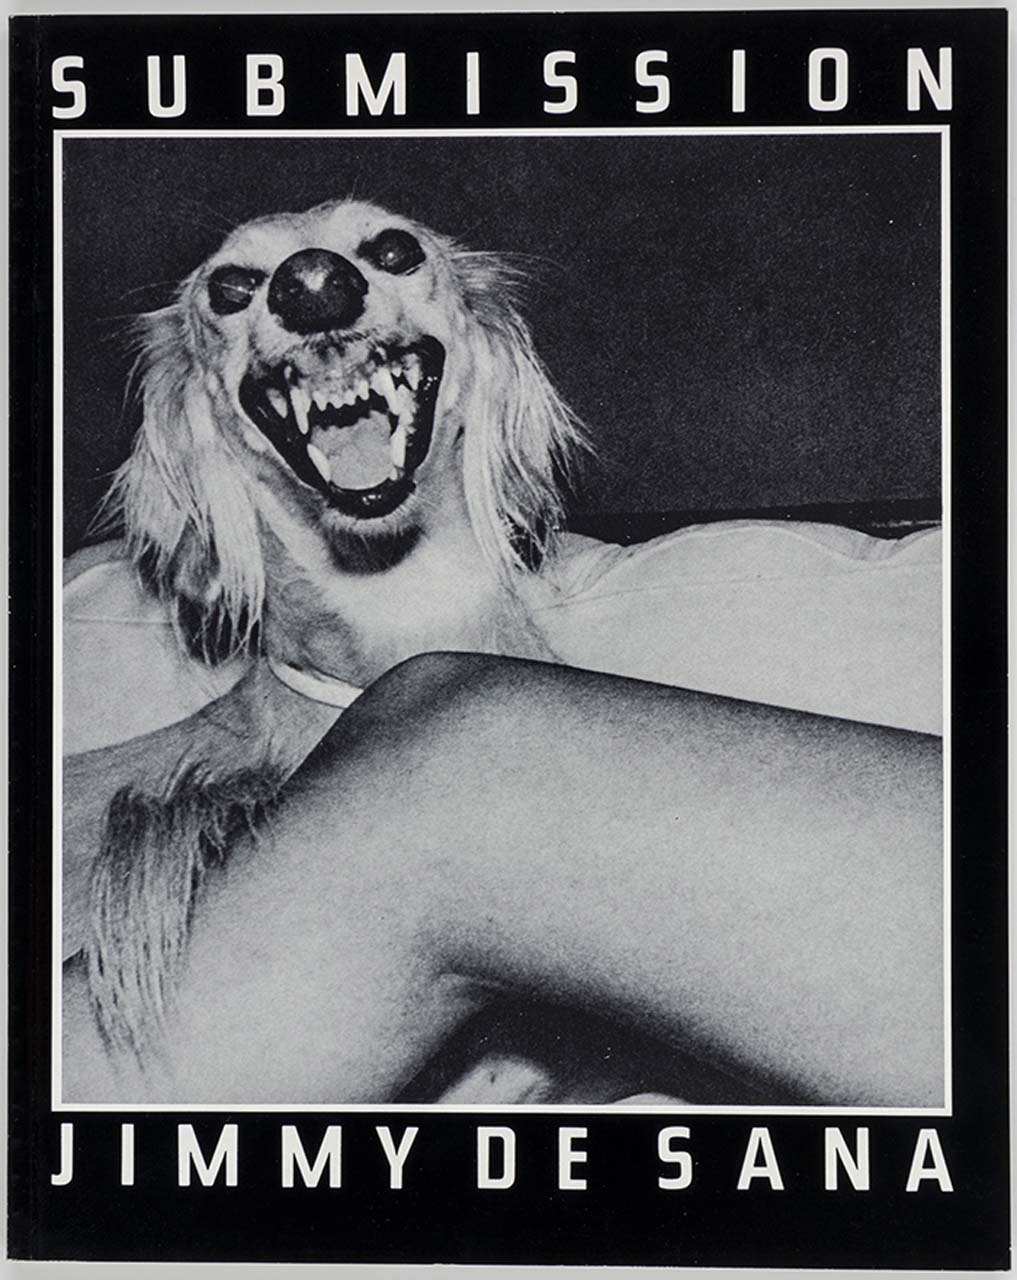 Jimmy de Sana, Submission. Photographs 1977-1978. Introduction William Burroughs, 59 pages, published by Scat, First Edition edition (1979).